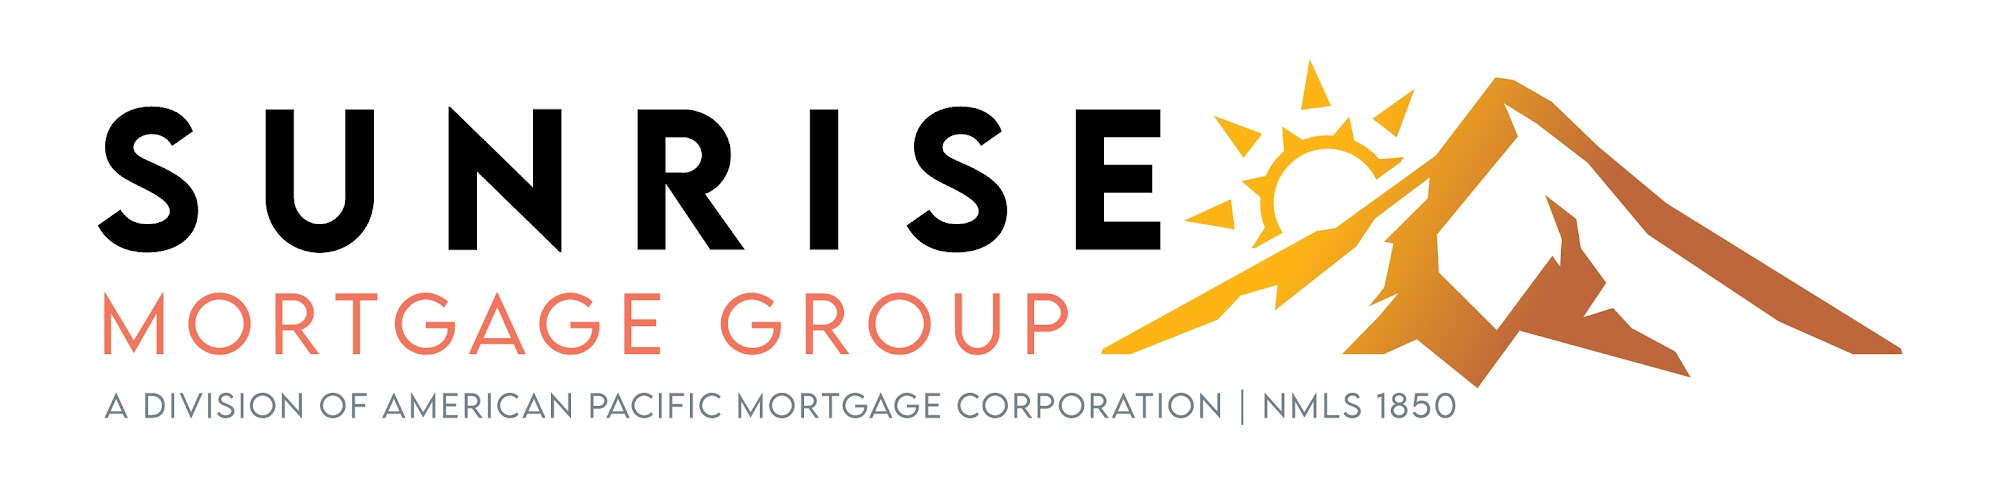 Sunrise Mortgage Group (A Division of American Pacific Mortgage)